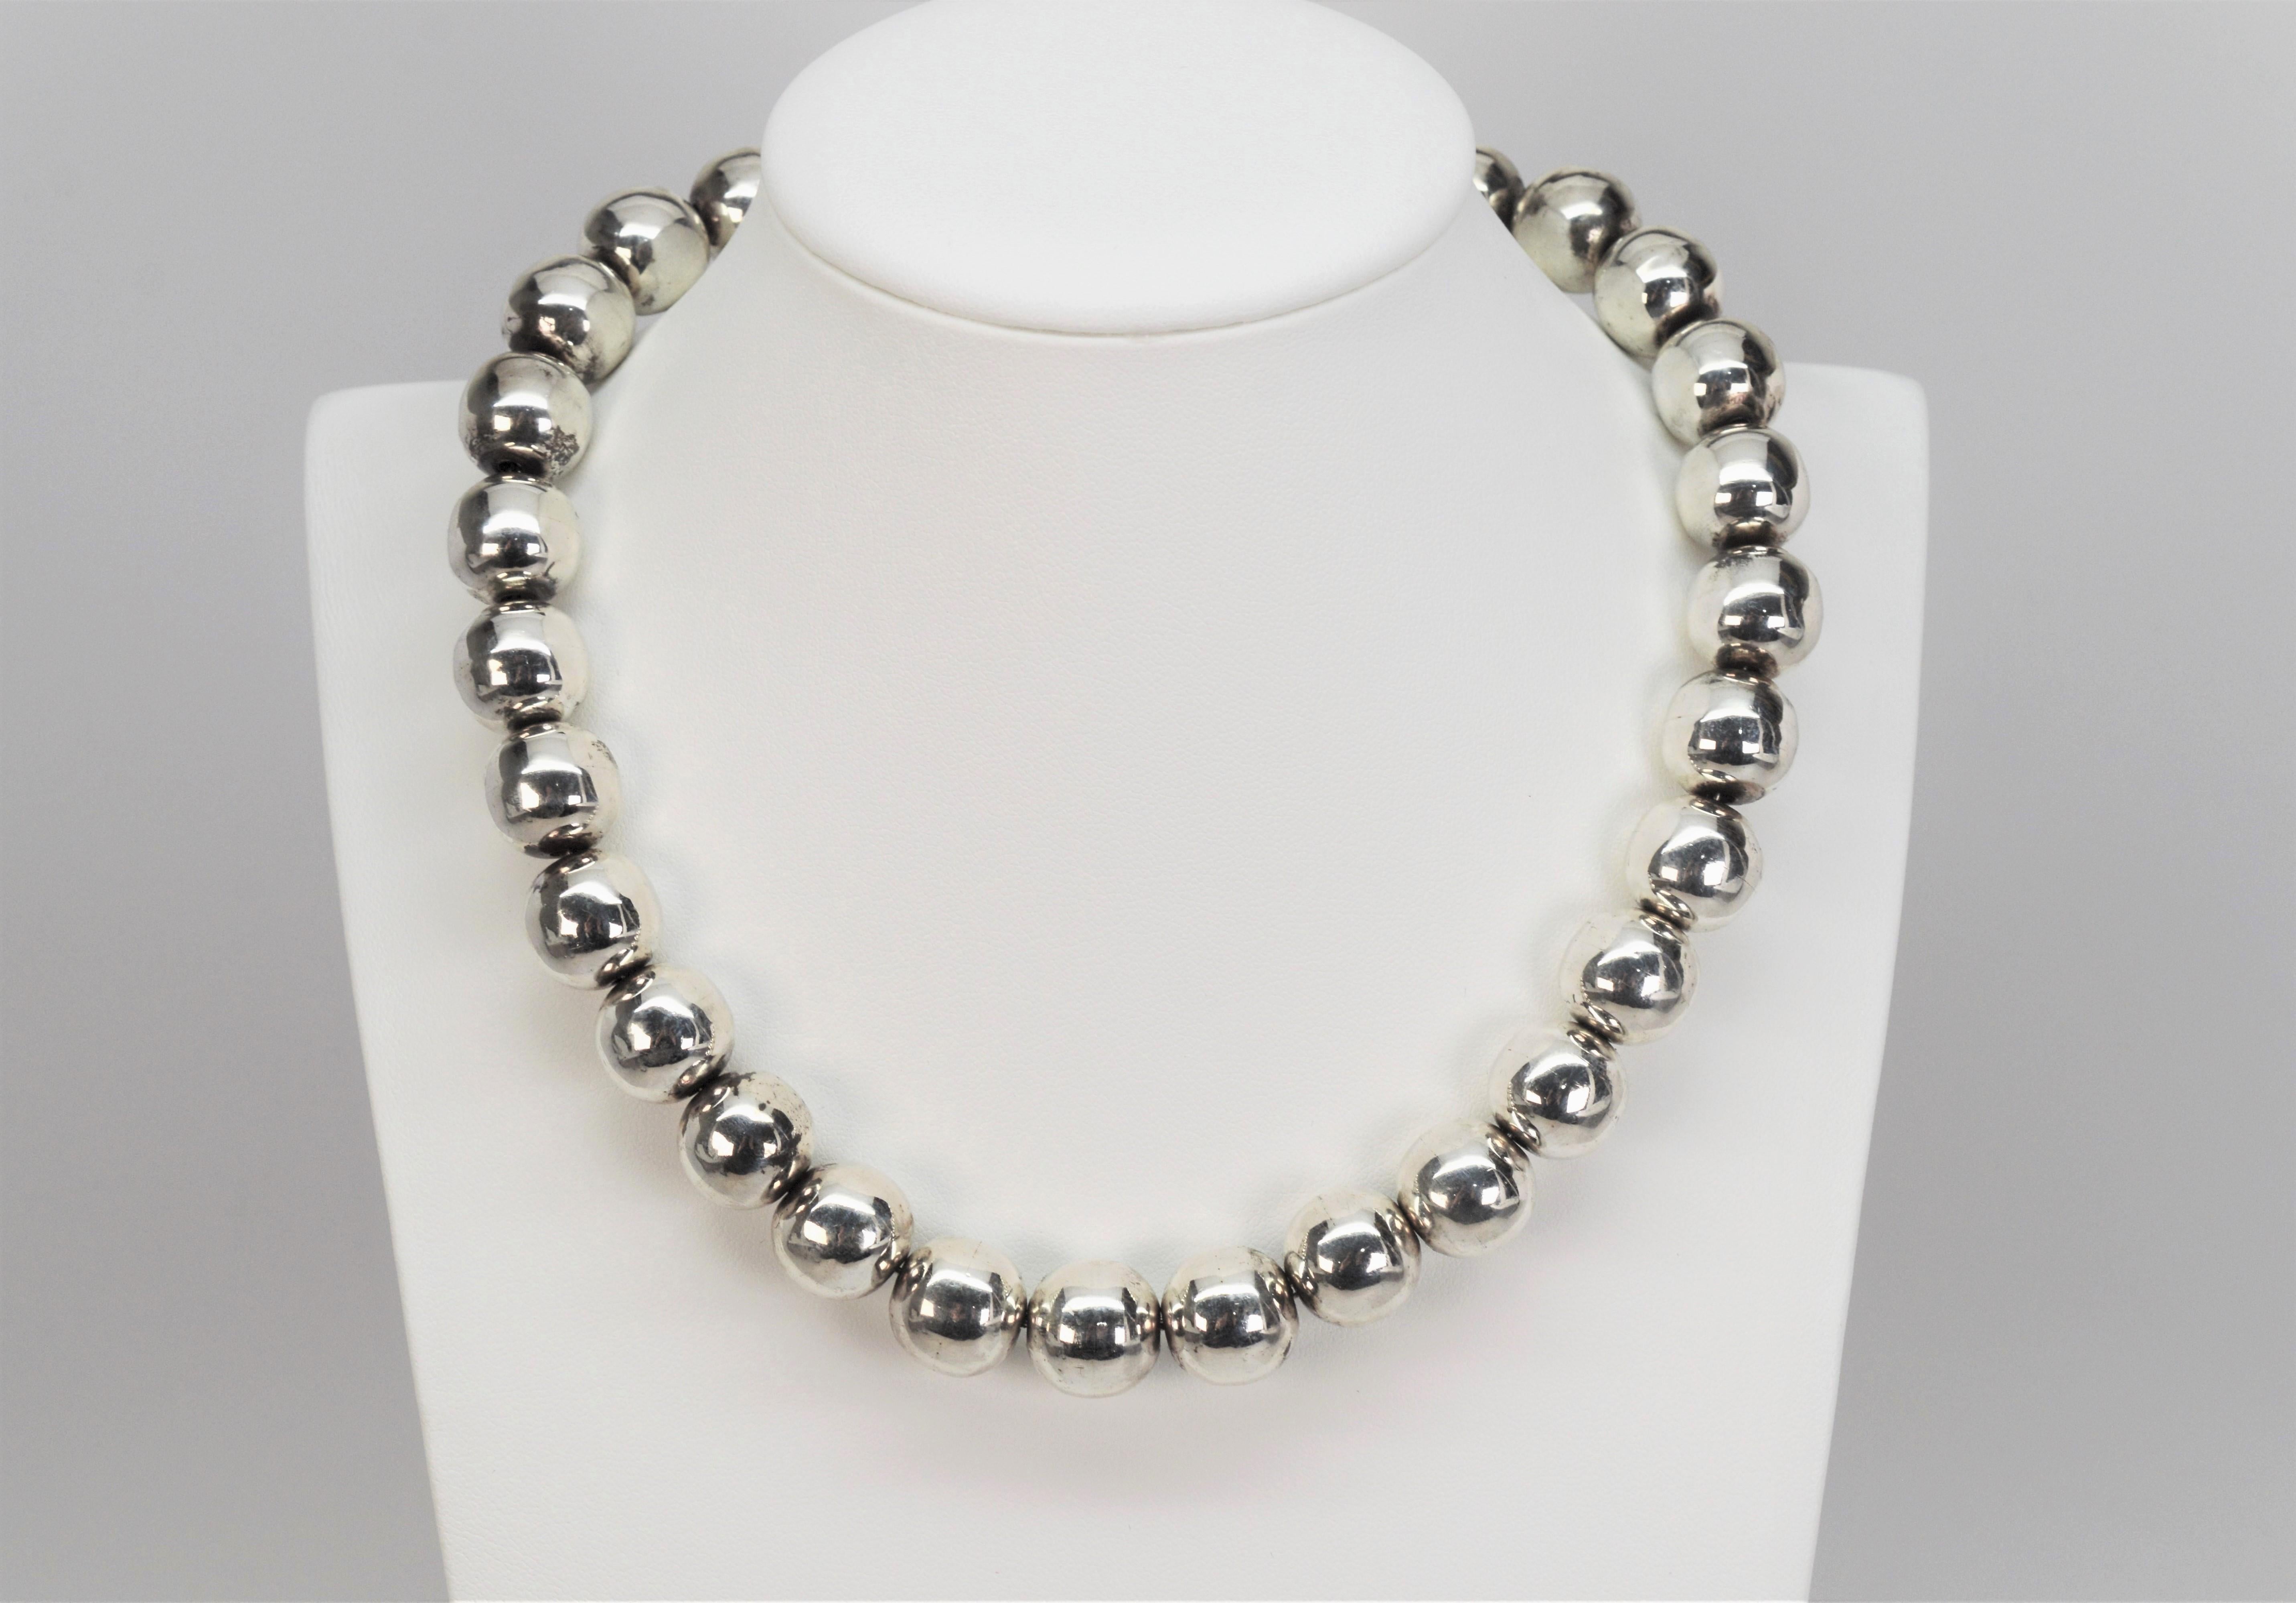 Plump and uniform in shape and size, twenty nine 13.5 mm sterling silver beads create this bright sterling collar necklace. 
Sixteen inches in length and finished with box clasp. Made in Mexico and stamped .925. Gift Boxed. 